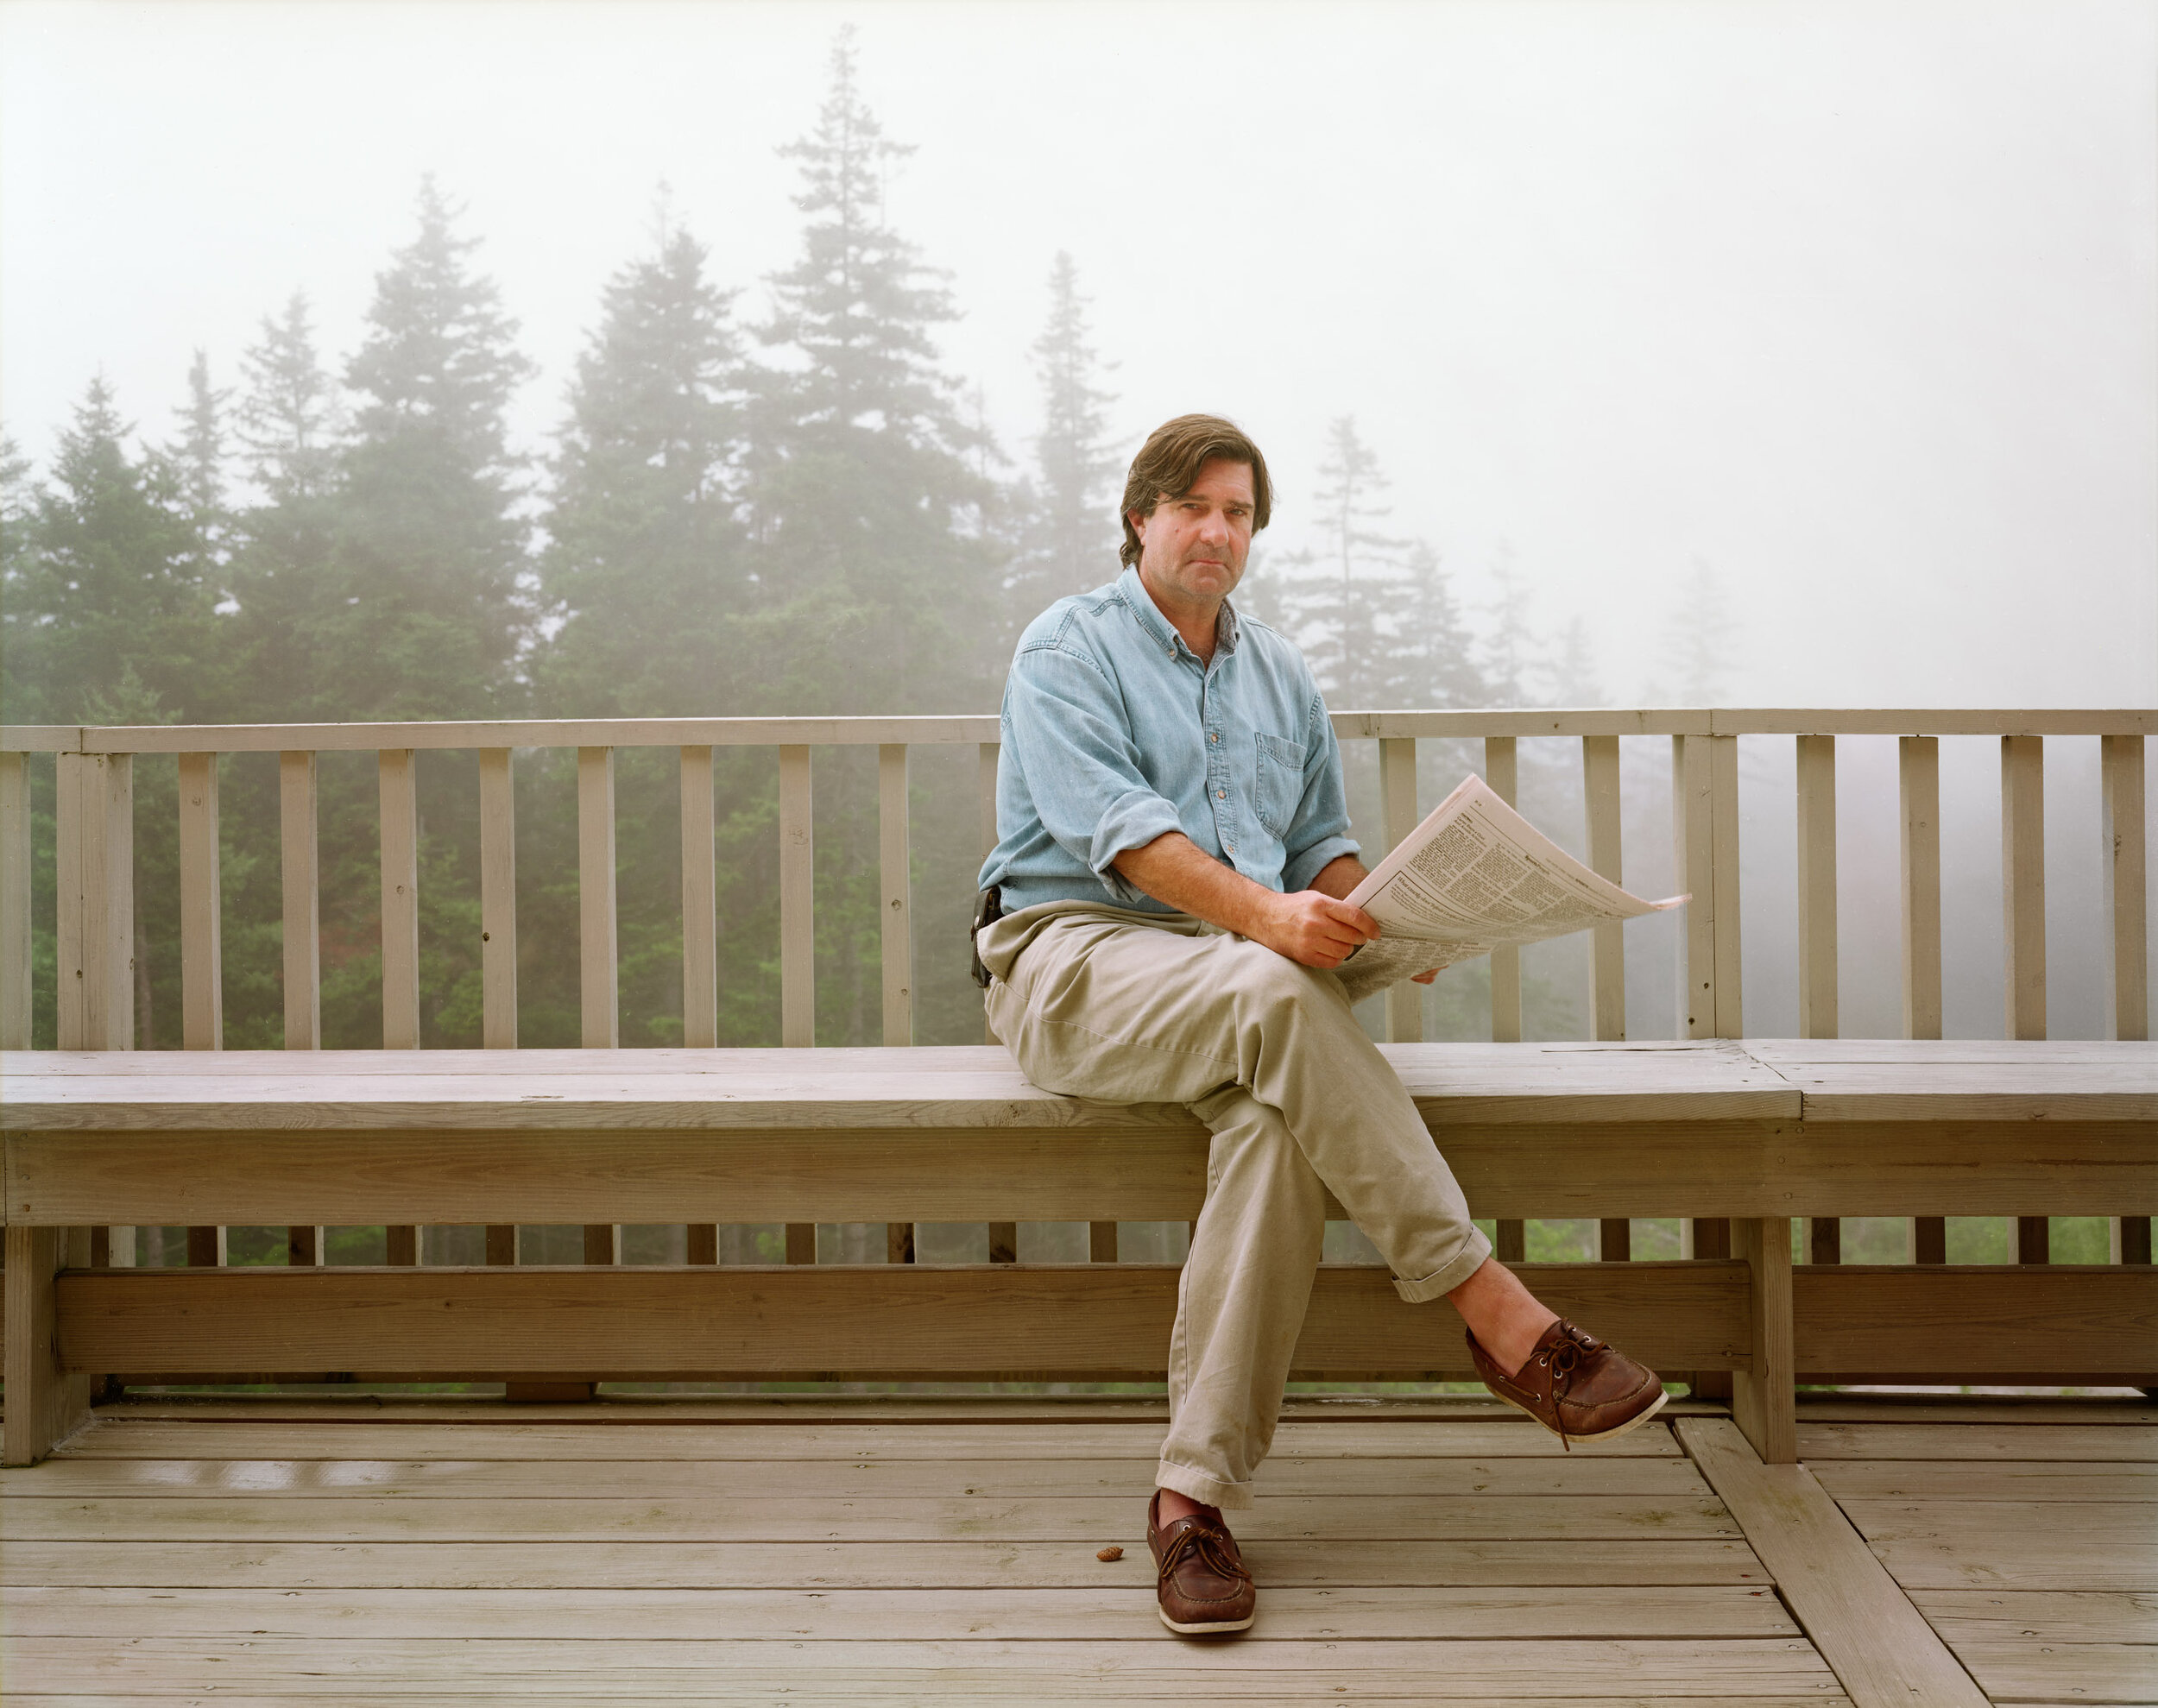 A Man Reading the New York Times while on Vacation in Deer Isle, Maine, August 1996